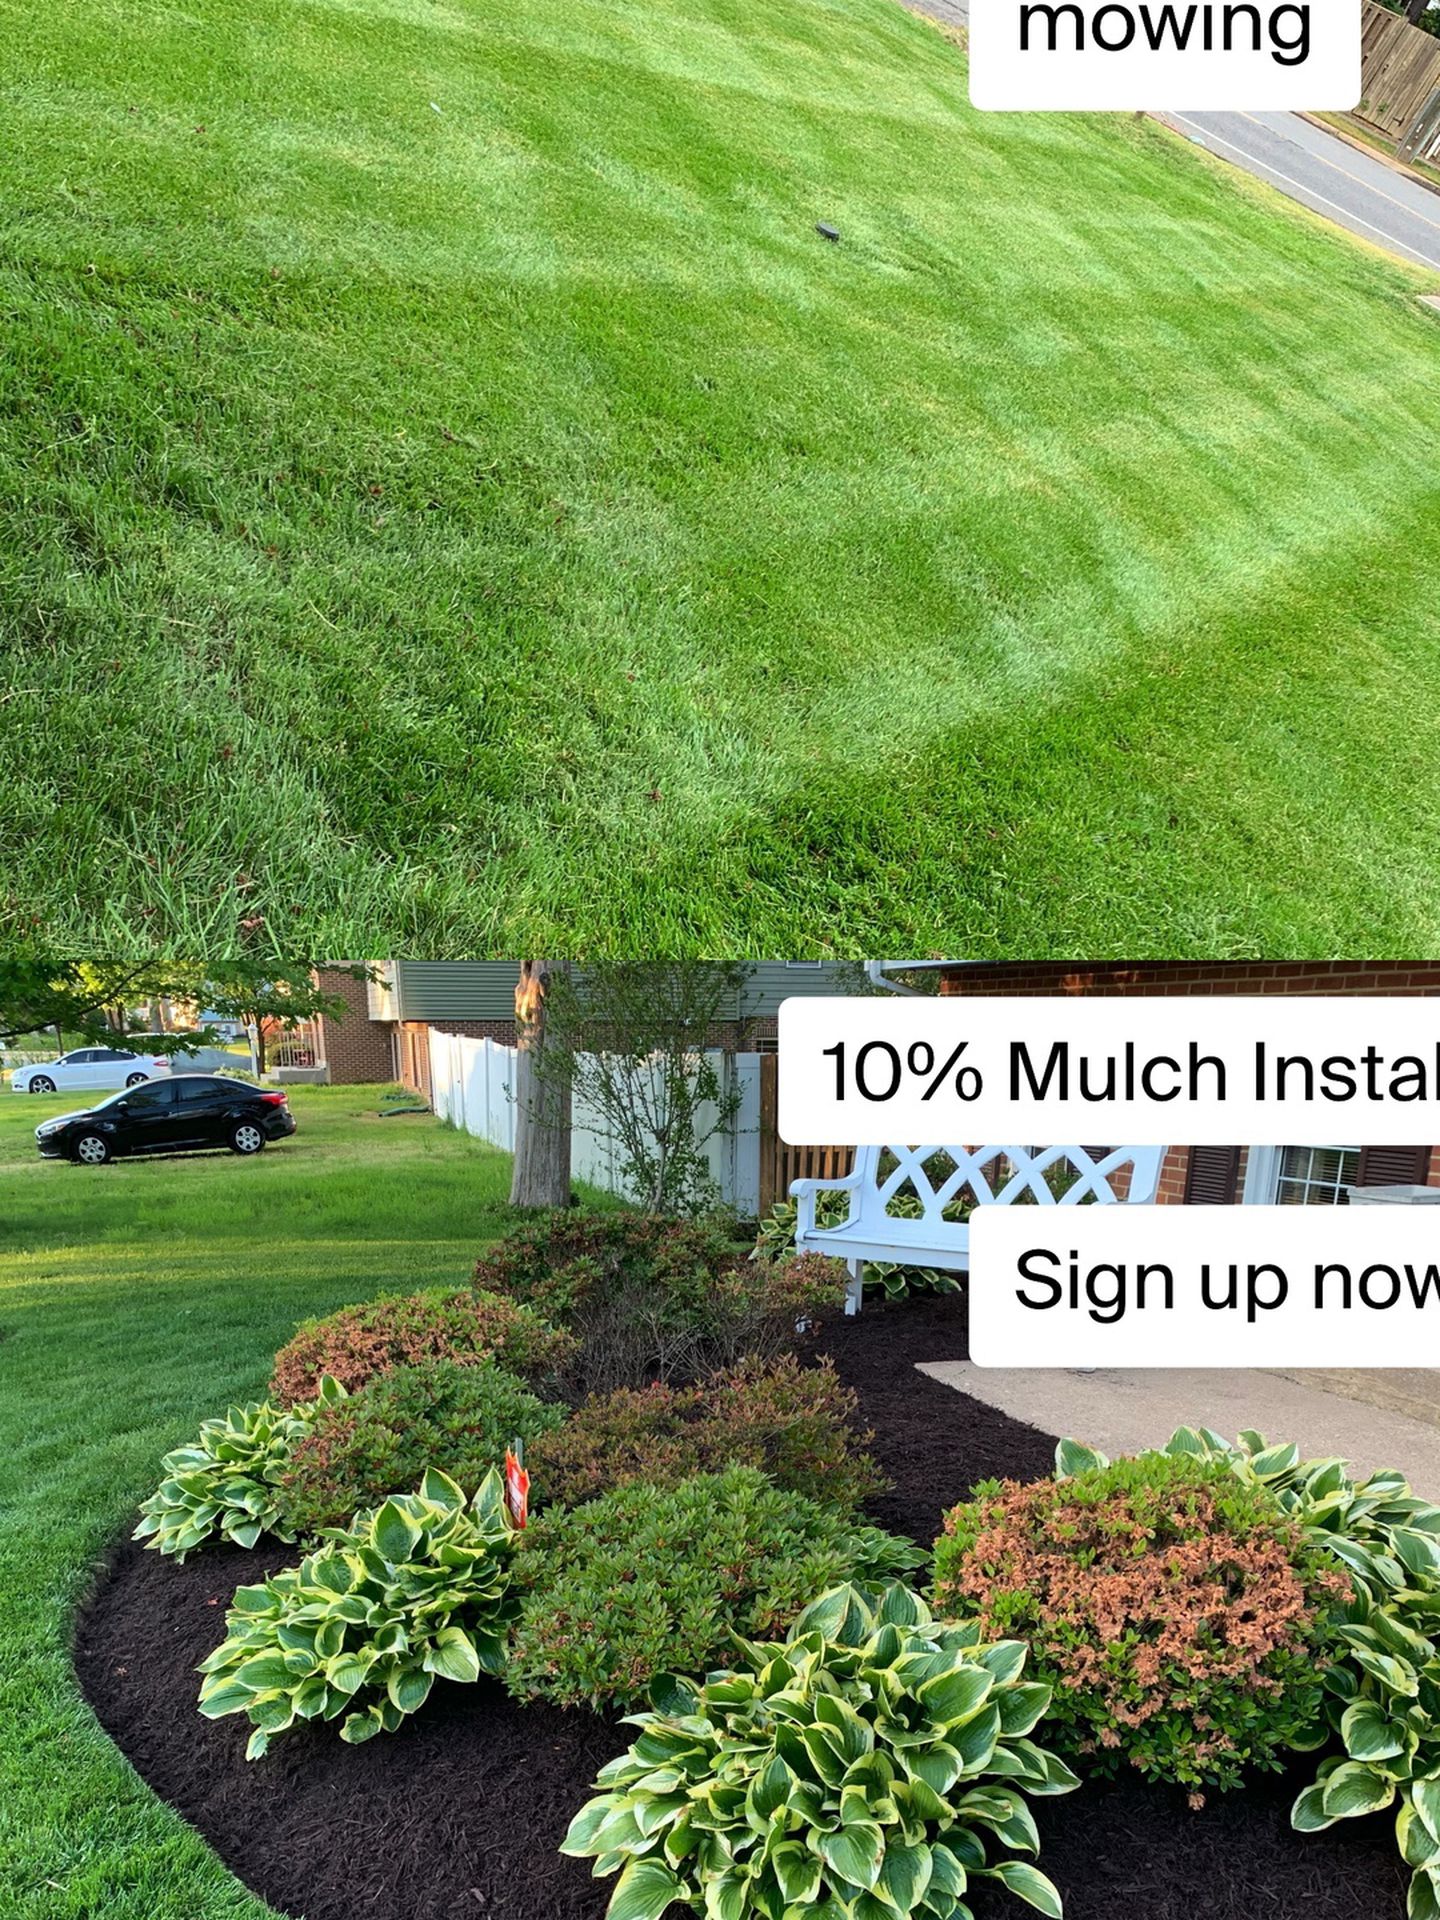 Mowing and mulch Installation